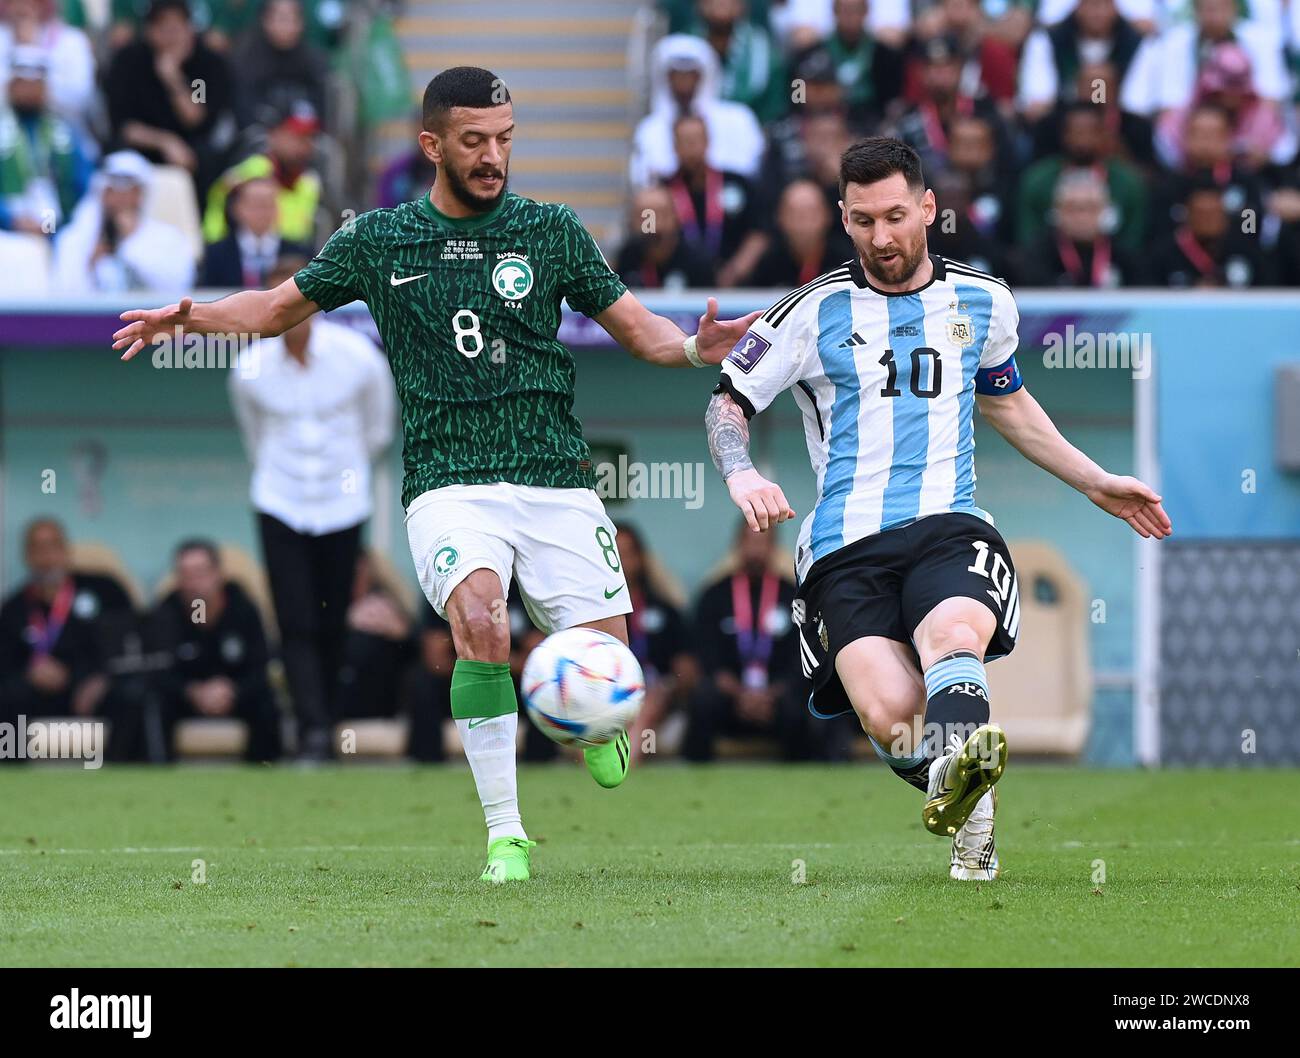 Lionel Messi passes the ball as Saudi Arabian defender, Abdulelah Al-Malki, presses hard to force an Argentina turnover during the 2022 FIFA World Cup Stock Photo